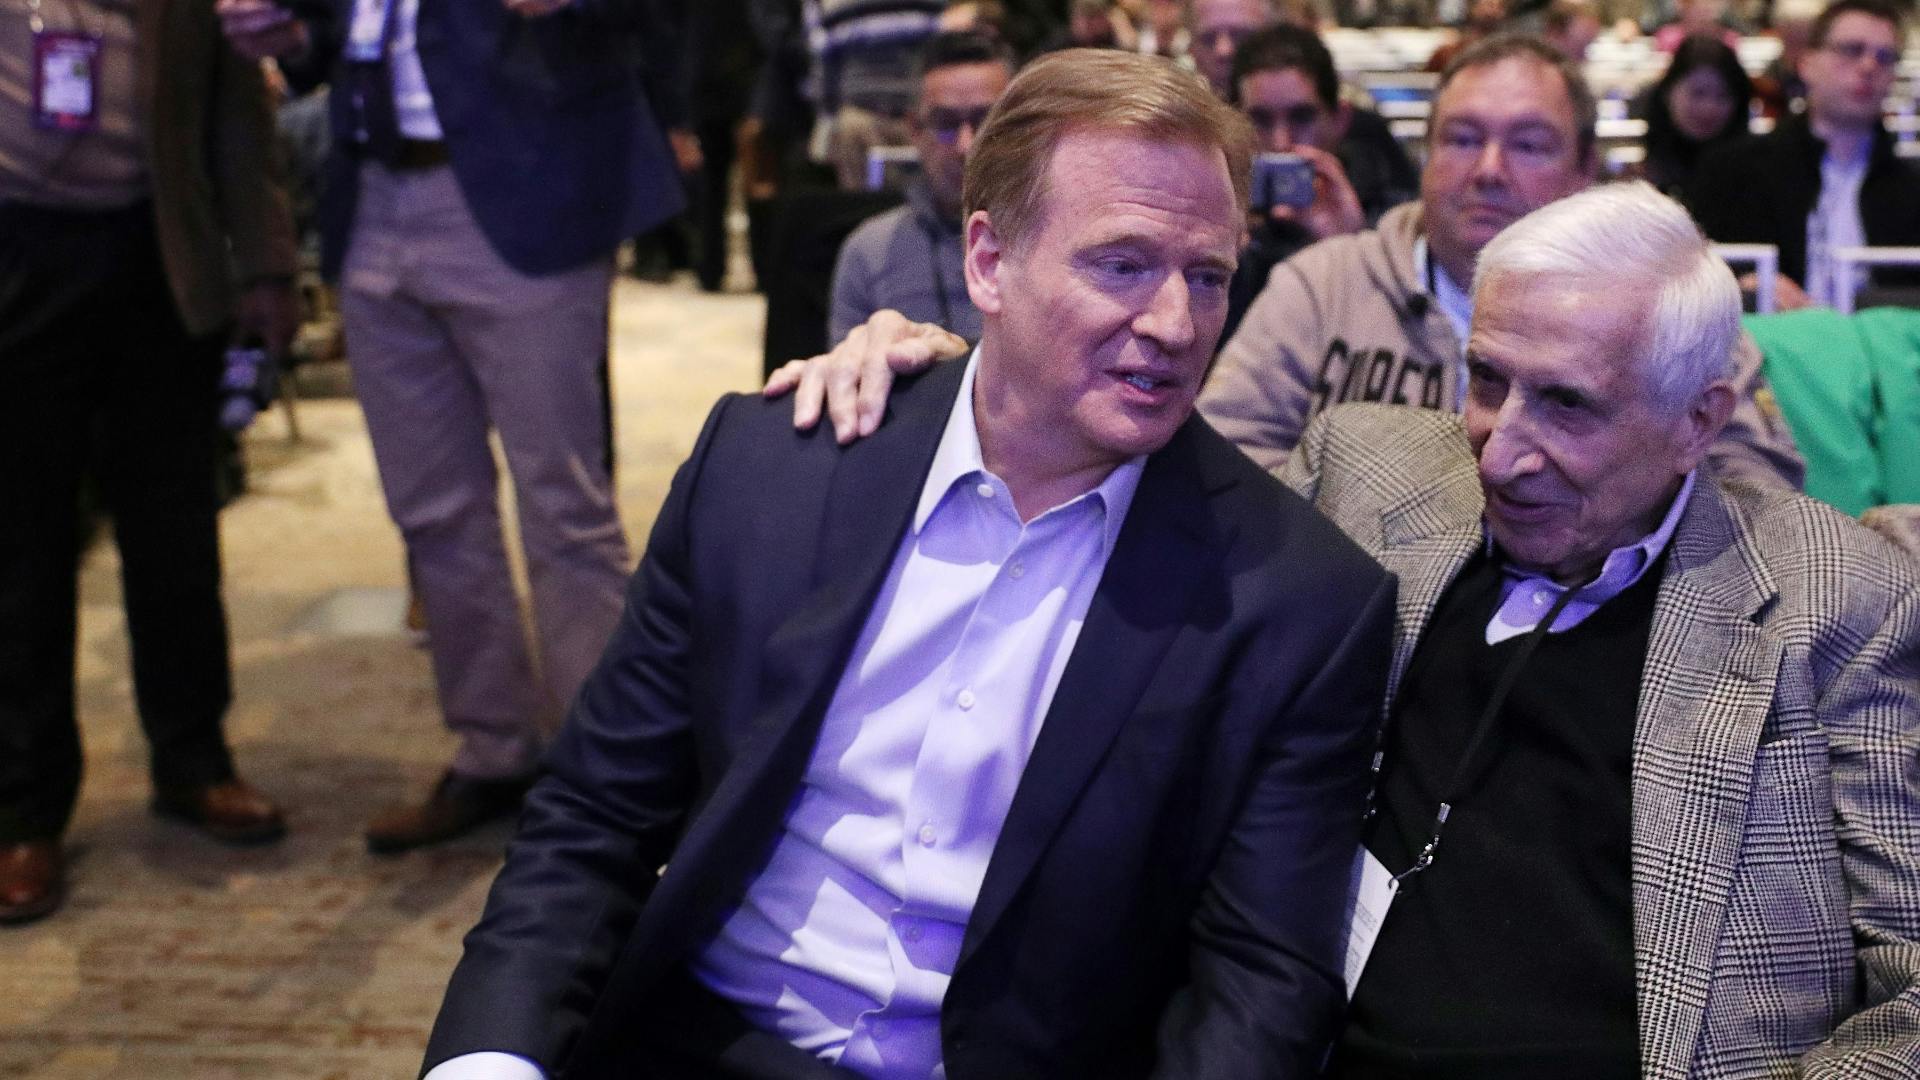 NFL Commissioner Roger Goodell recognized 97-year-old columnist Sid Hartman during Goodell's annual "State of the NFL" news conference.